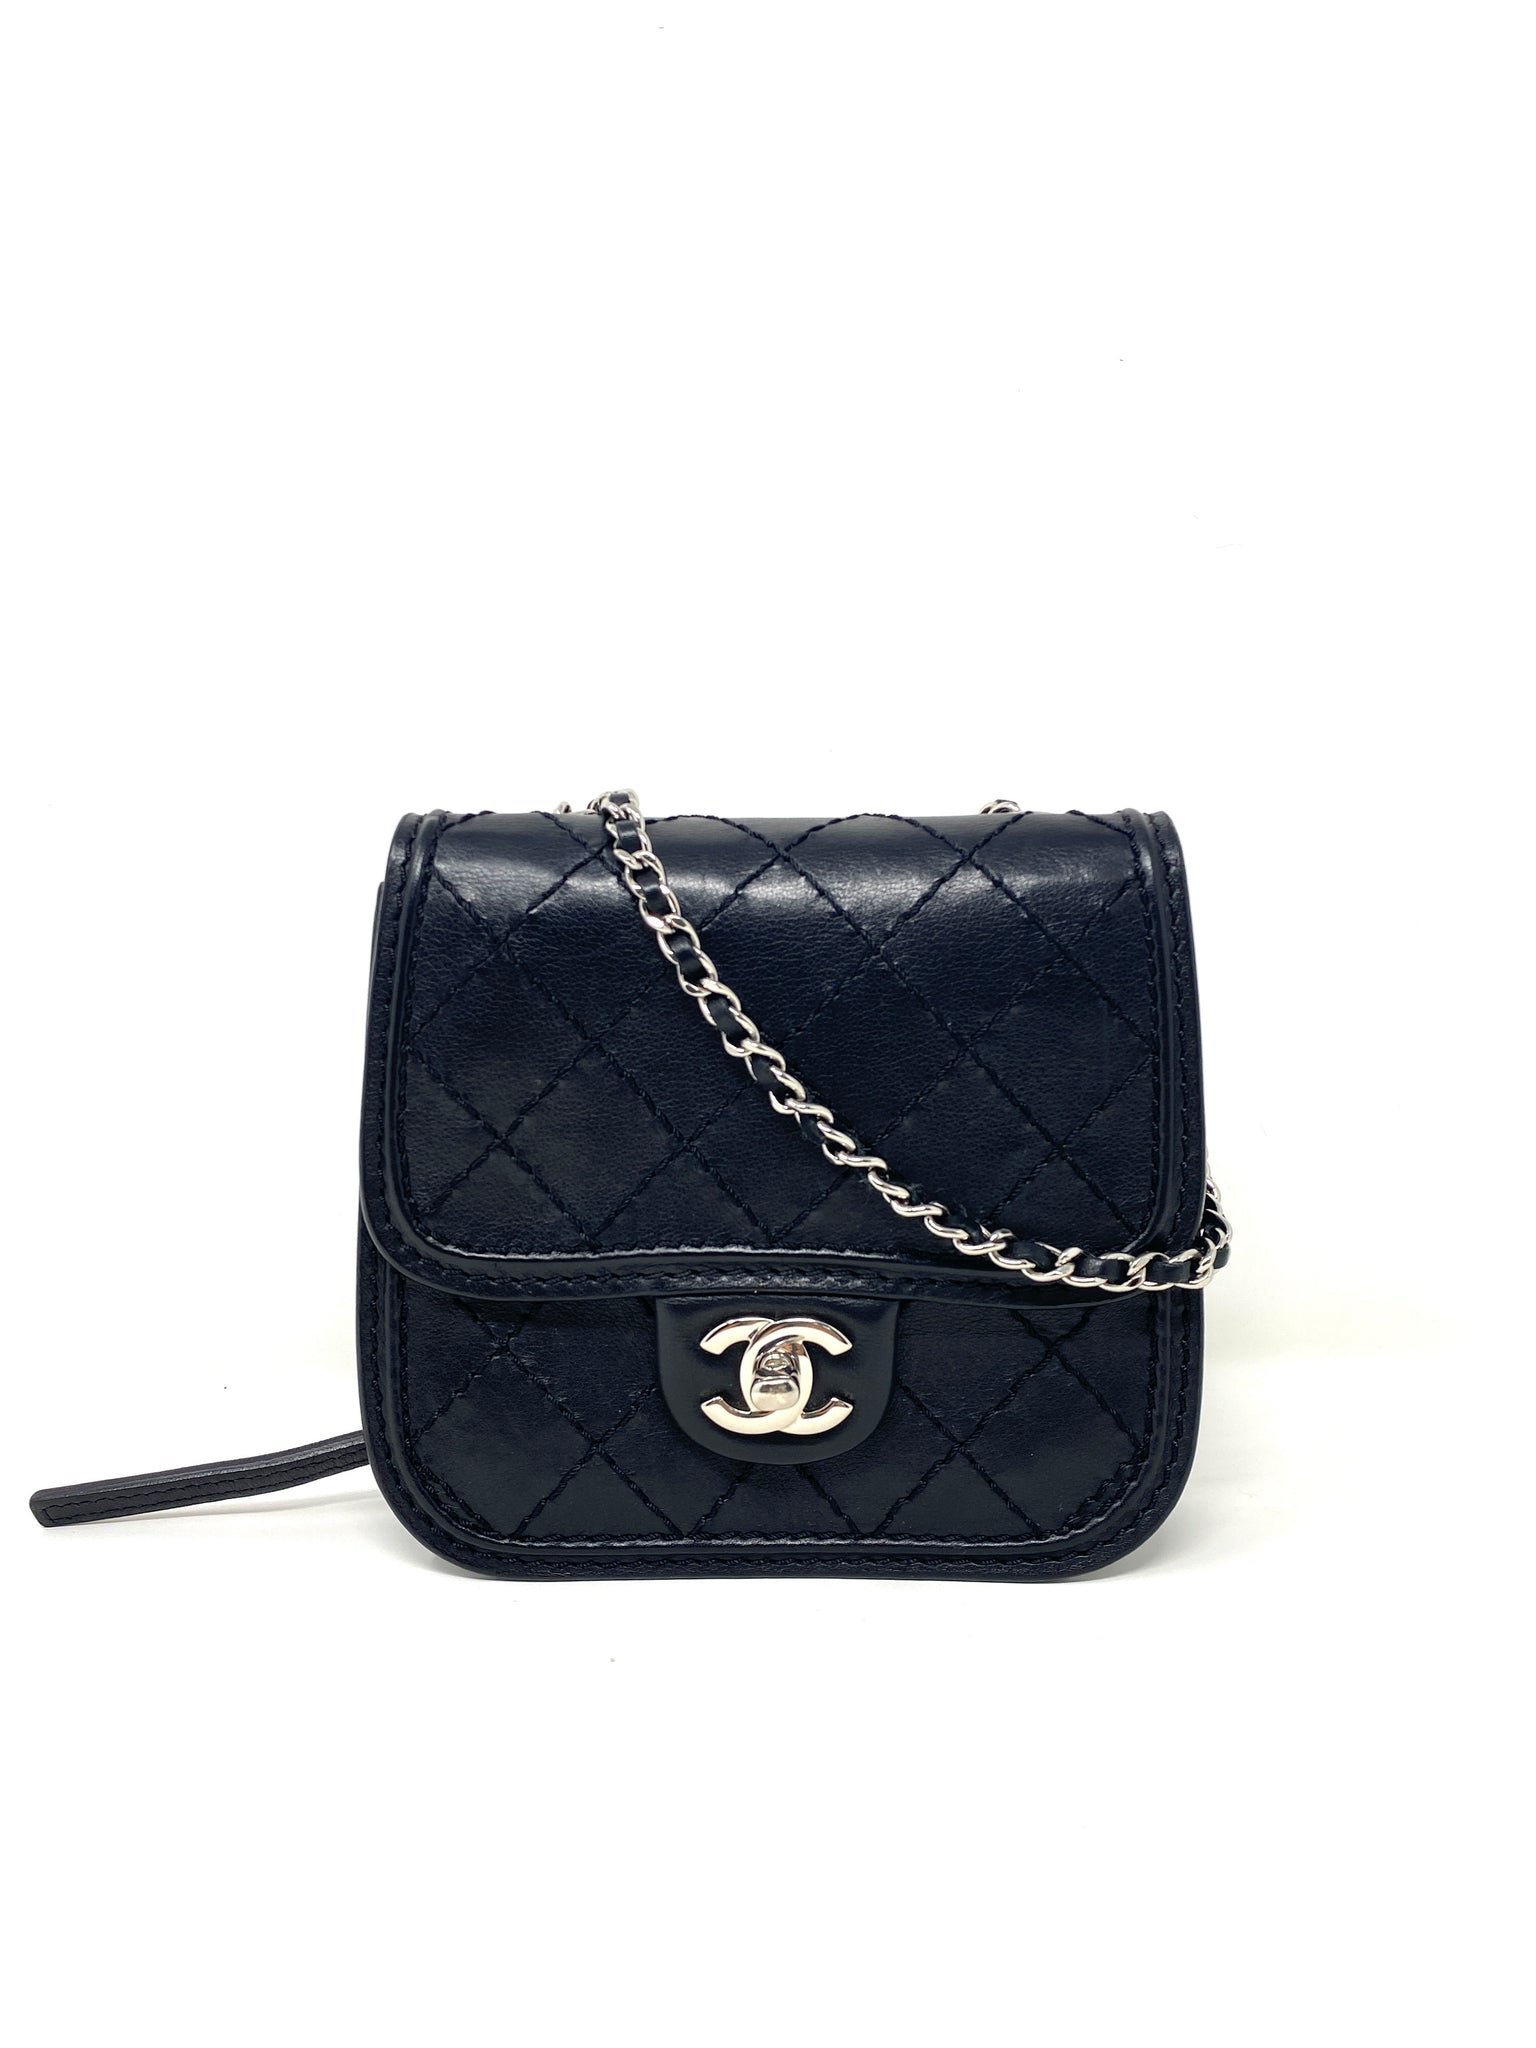 Chanel Quilted Patchwork Jumbo Flap Bag – LuxCollector Vintage